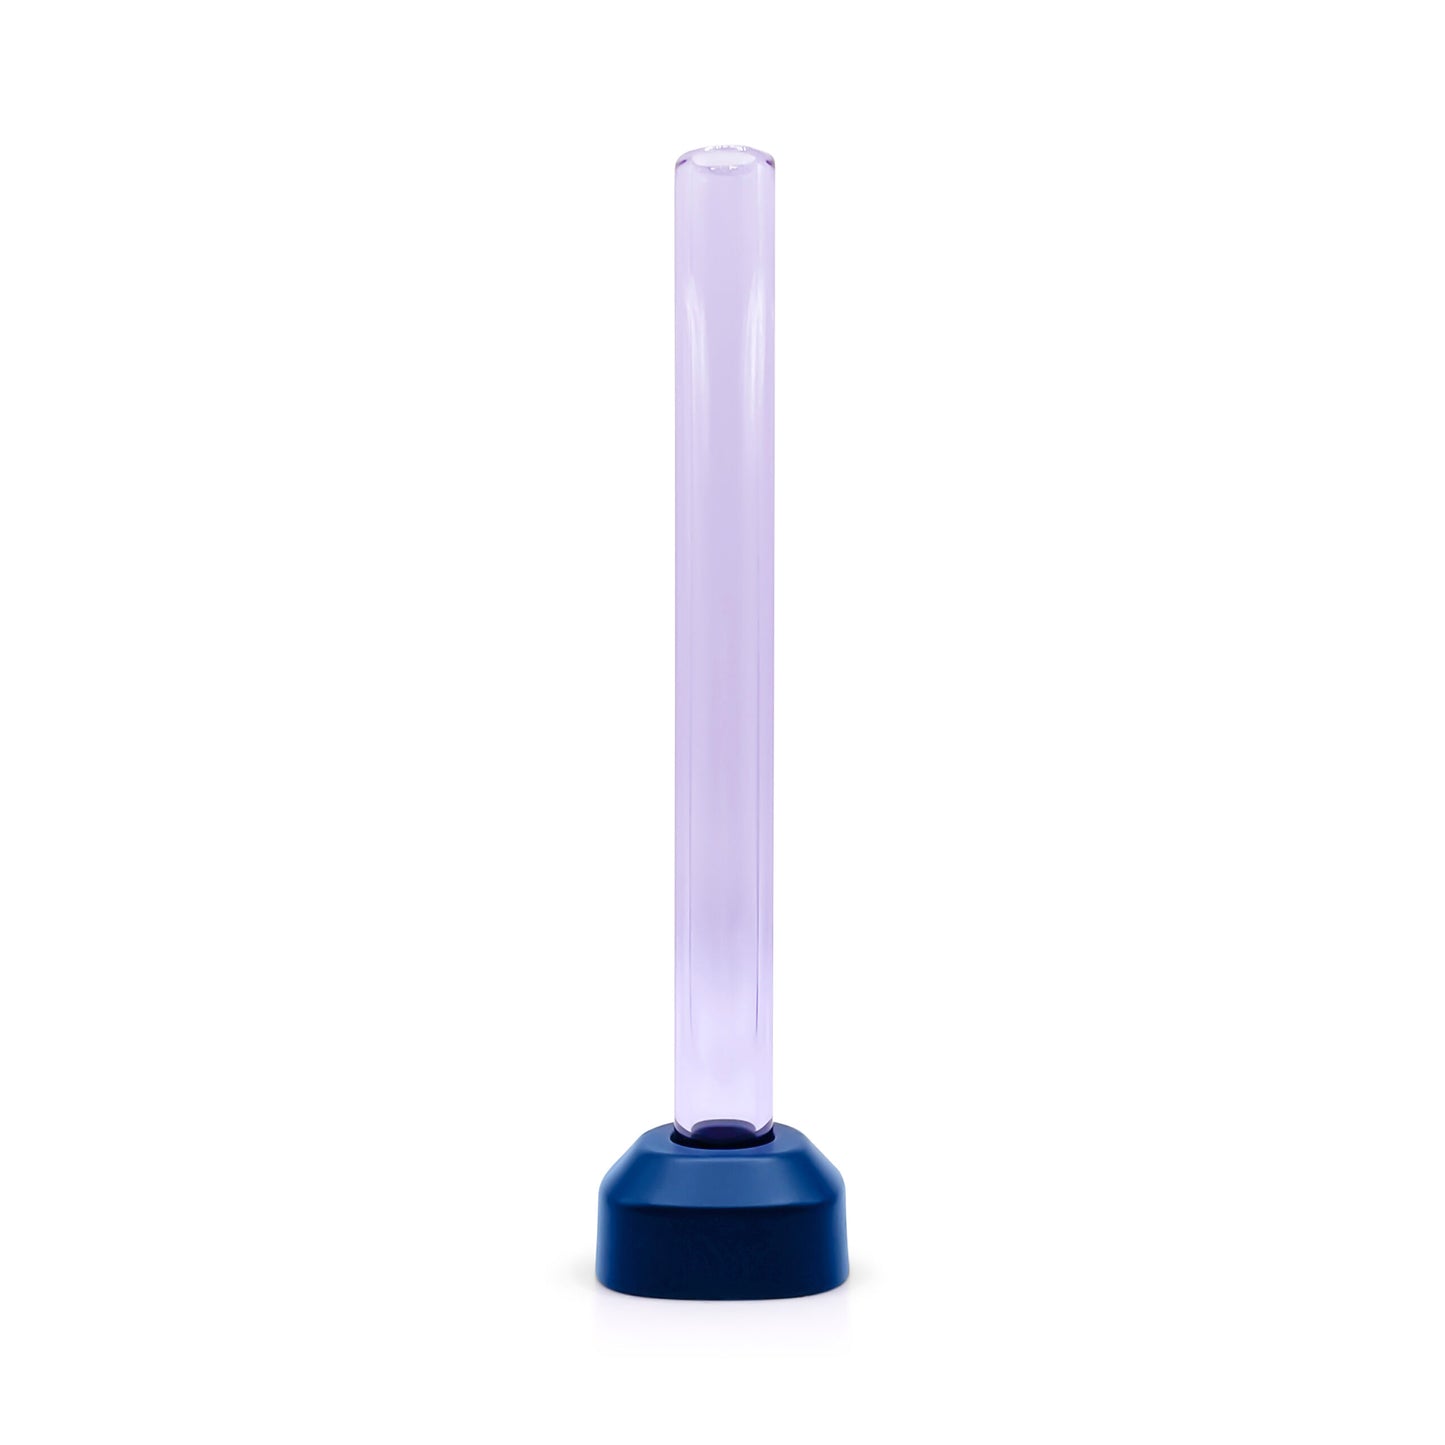 Plaisir - Norddampf Relict, Glass Mouthpiece, Straight 120mm